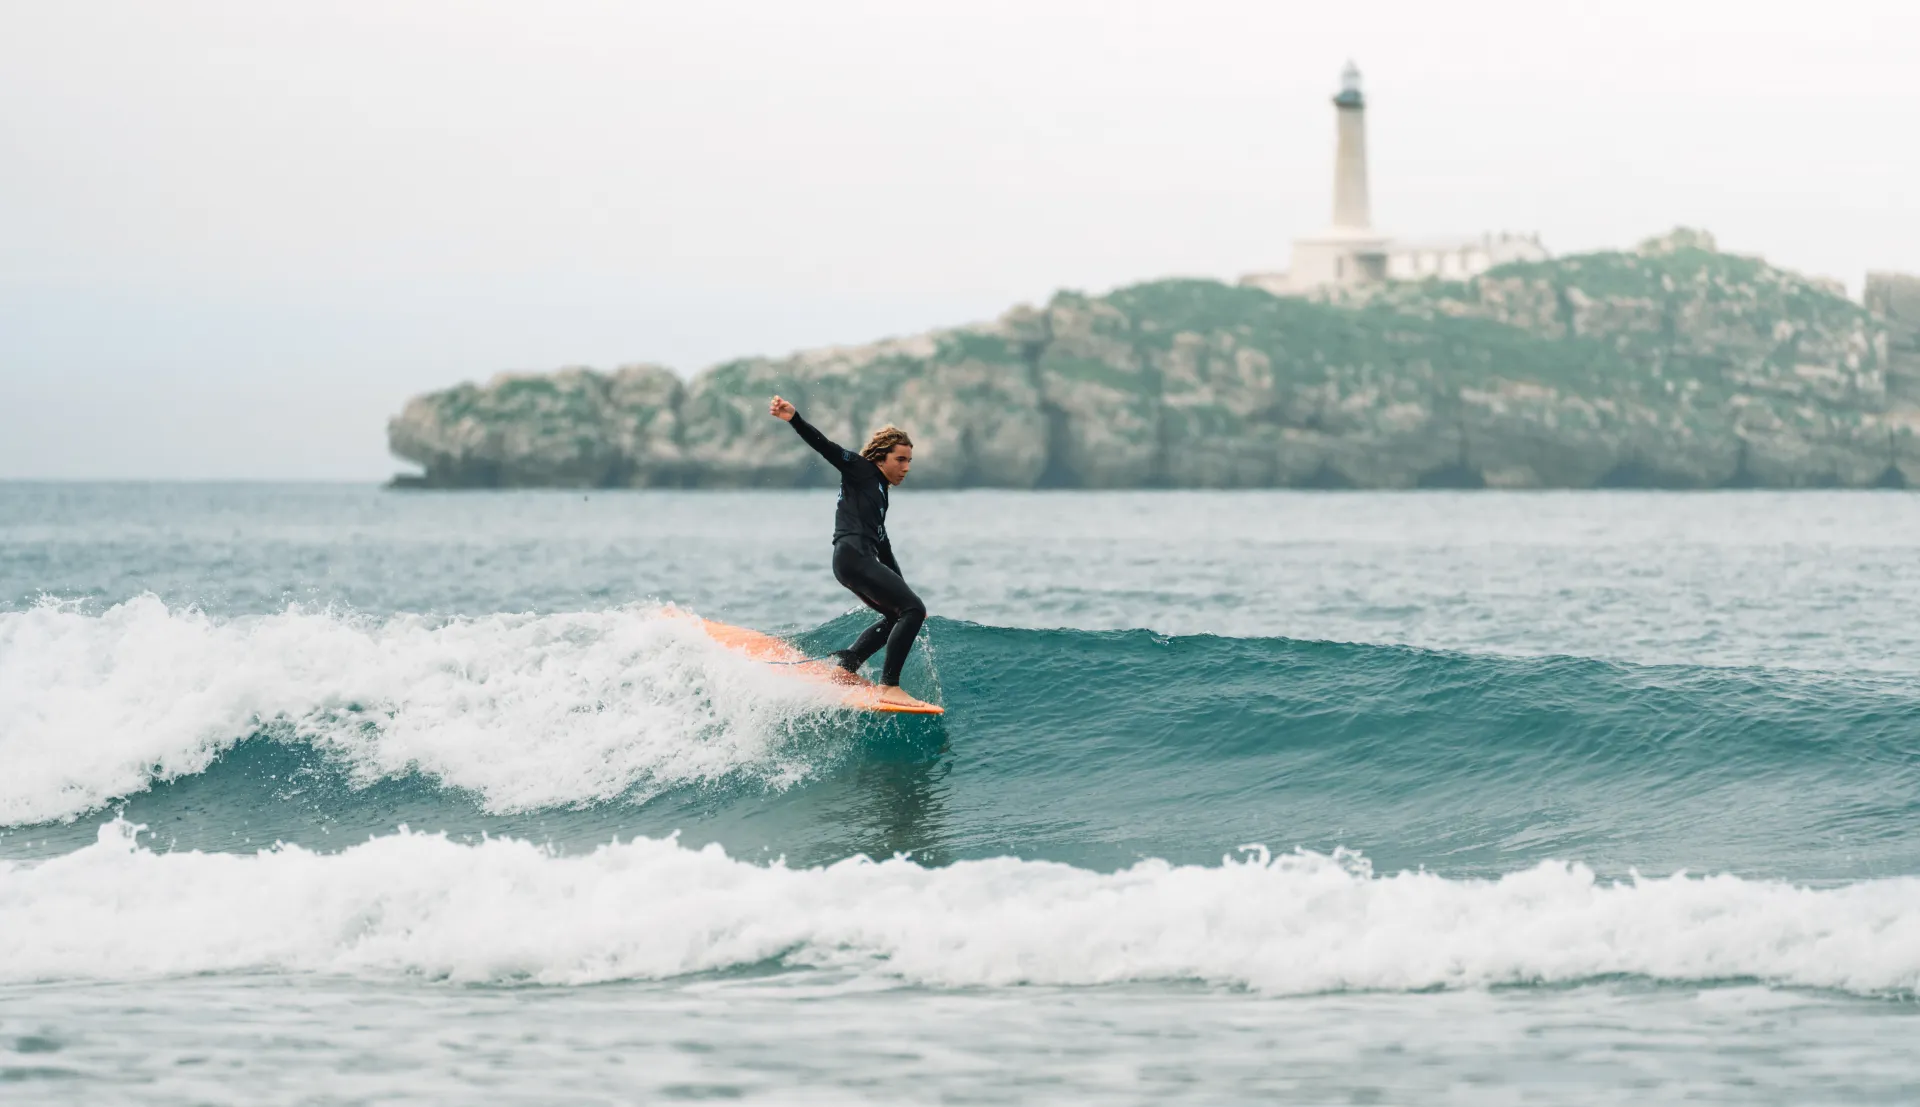 Sandro Antonietti. effective and visually appealing solutions with a broad skillset in Marketing, Multimedia, Design, and Web-development., Swiss Surfing Championship, photography, videography